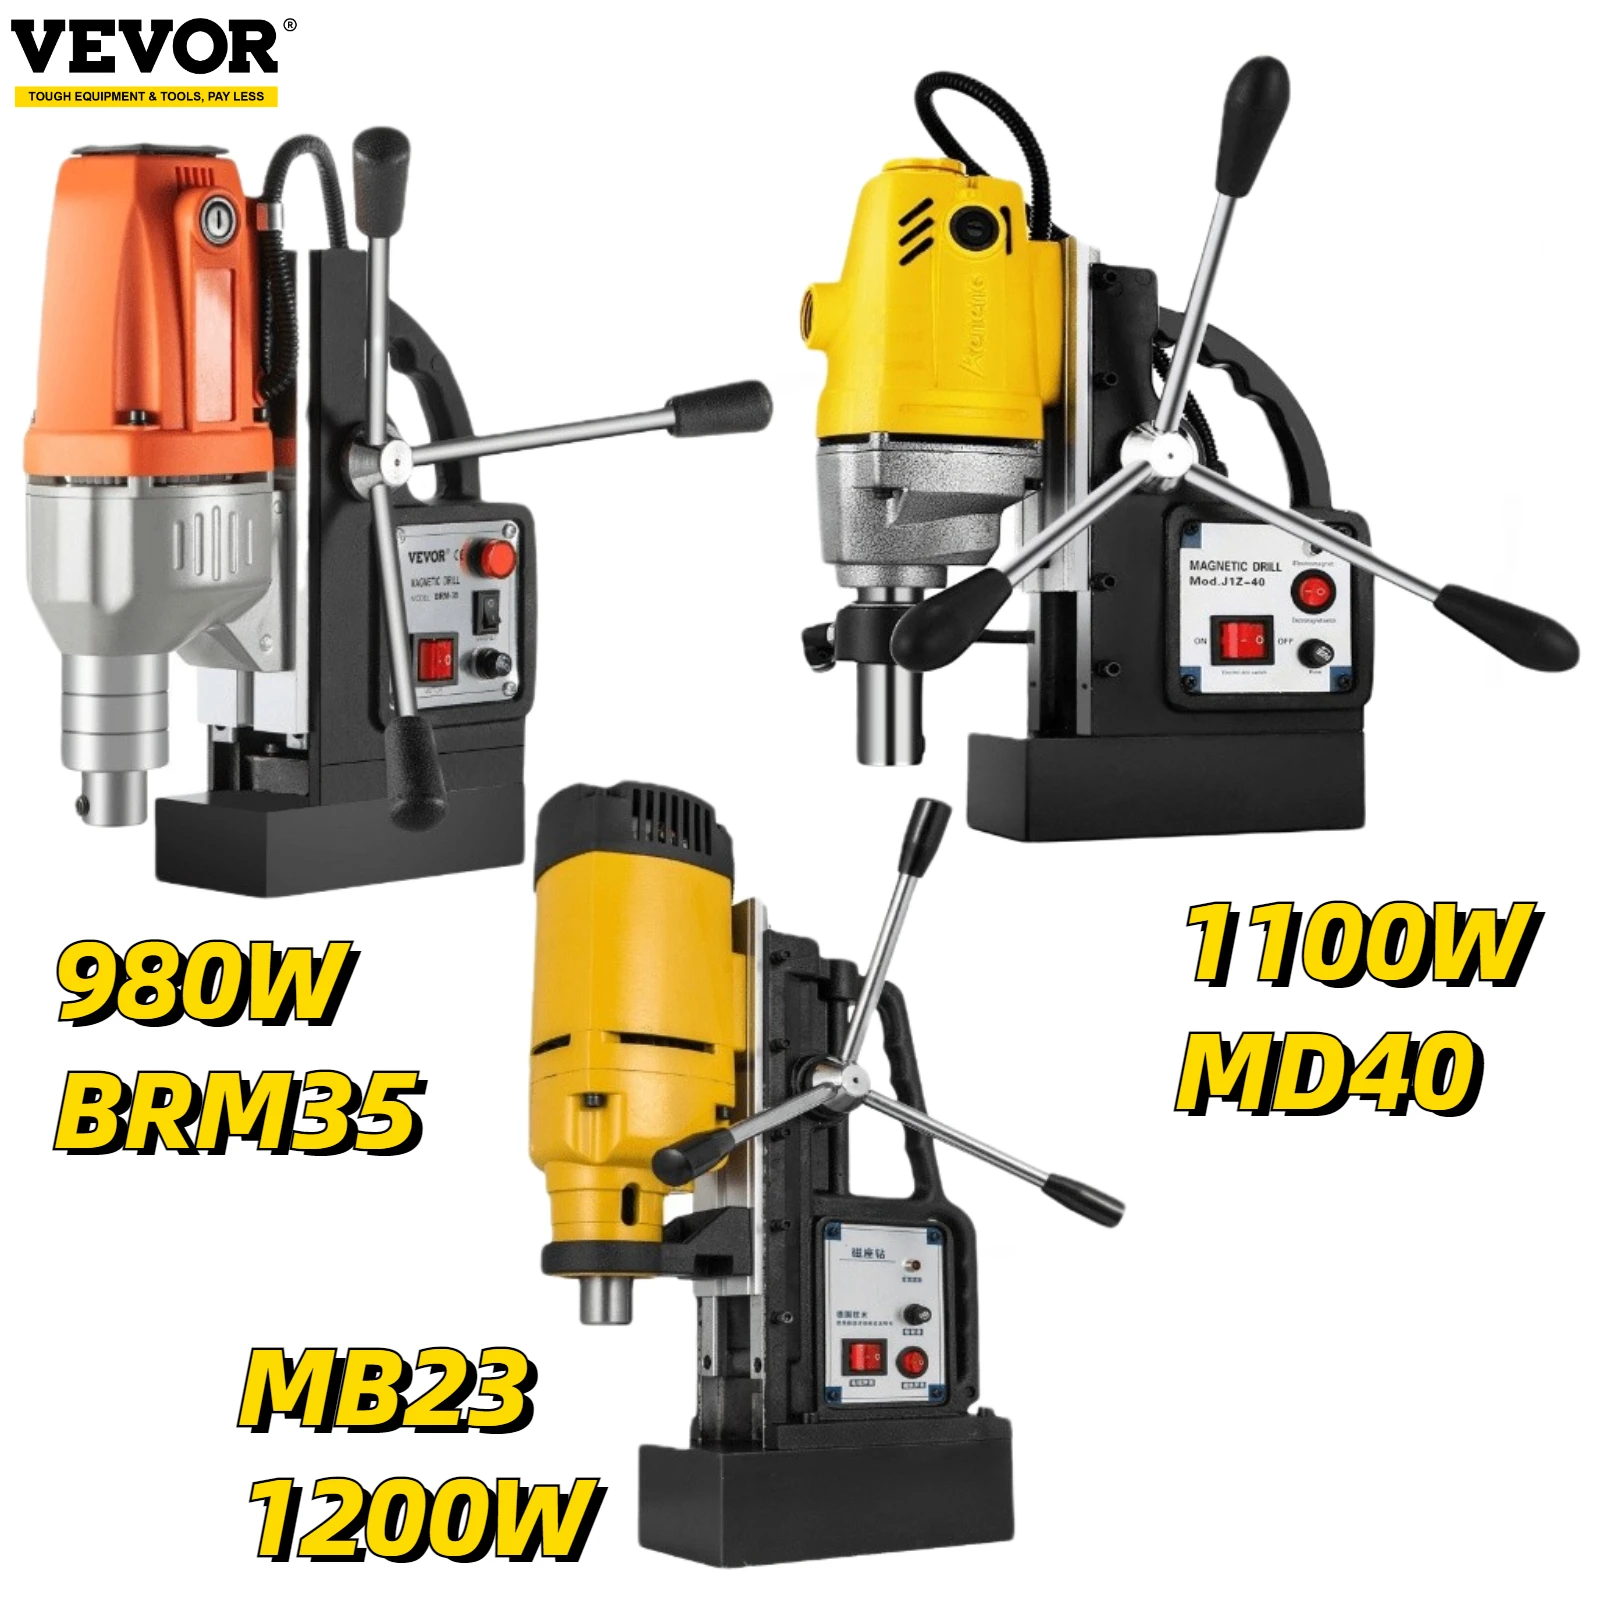 VEVOR Magnetic Drill Press 980W 1100W 1200W Electric Bench Drilling Rig Machine for Engineering Steel Structure MD40 MB23 BRM35